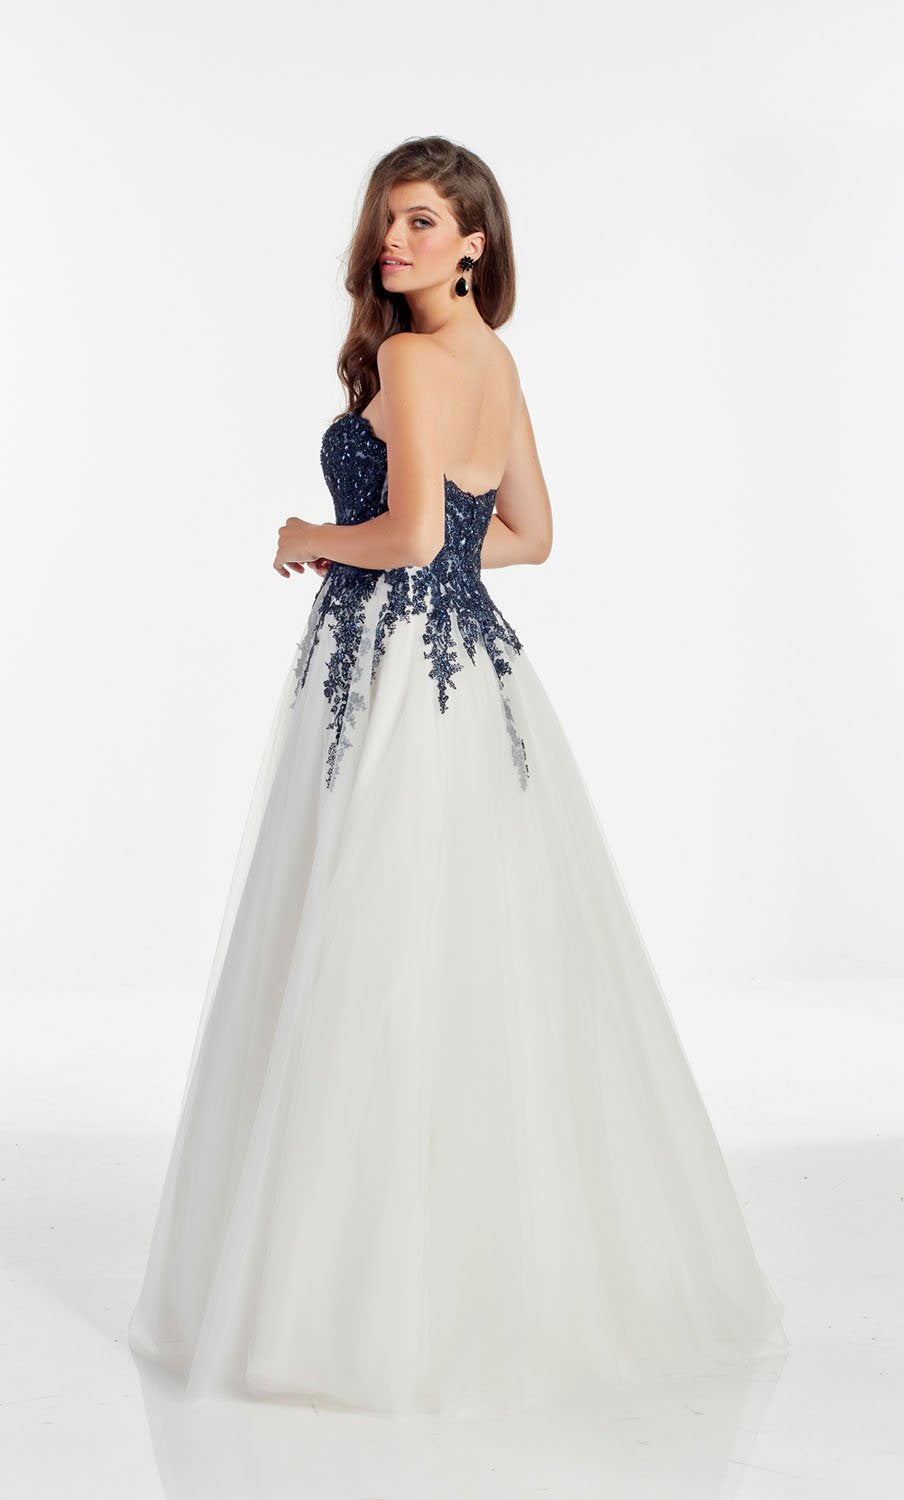 Alyce Paris 60890 dress images in these colors: Midnight Diamond White,  Mademoiselle,  Azure Diamond White,  Storm Cloud Pink,  Solid Diamond White.